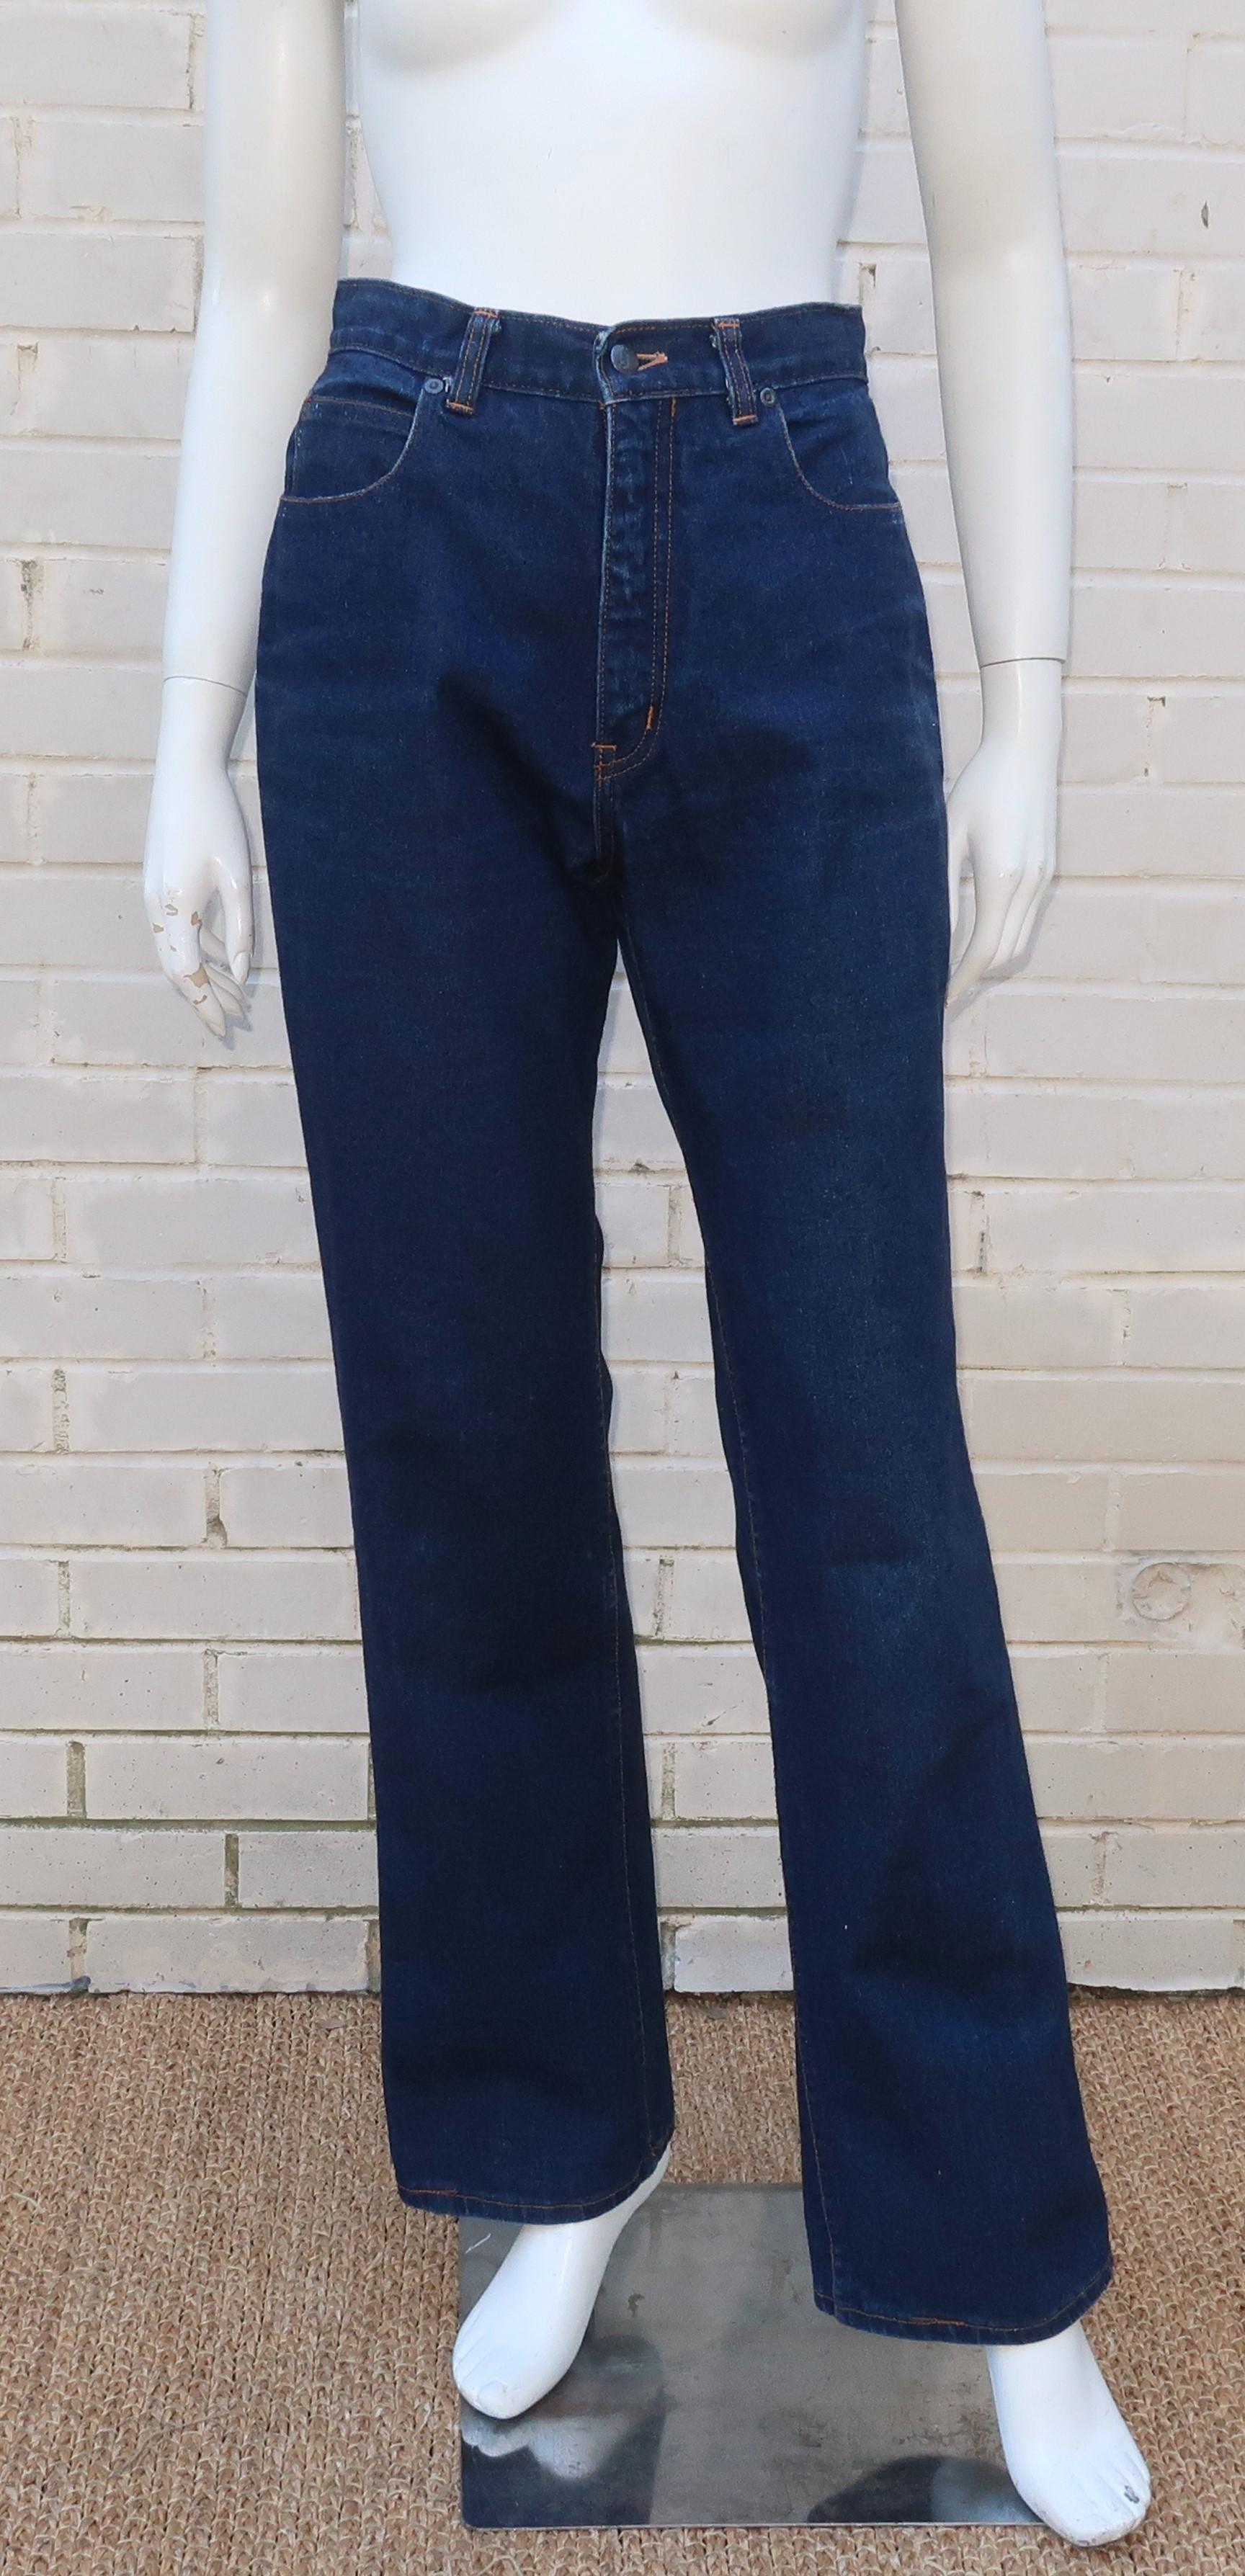 Yves Saint Laurent once said that he wished he had invented blue jeans as their design epitomized everything he hoped for in his clothes ... a simple sex appeal with an effortless style.  He may not have invented jeans but his foray into the denims